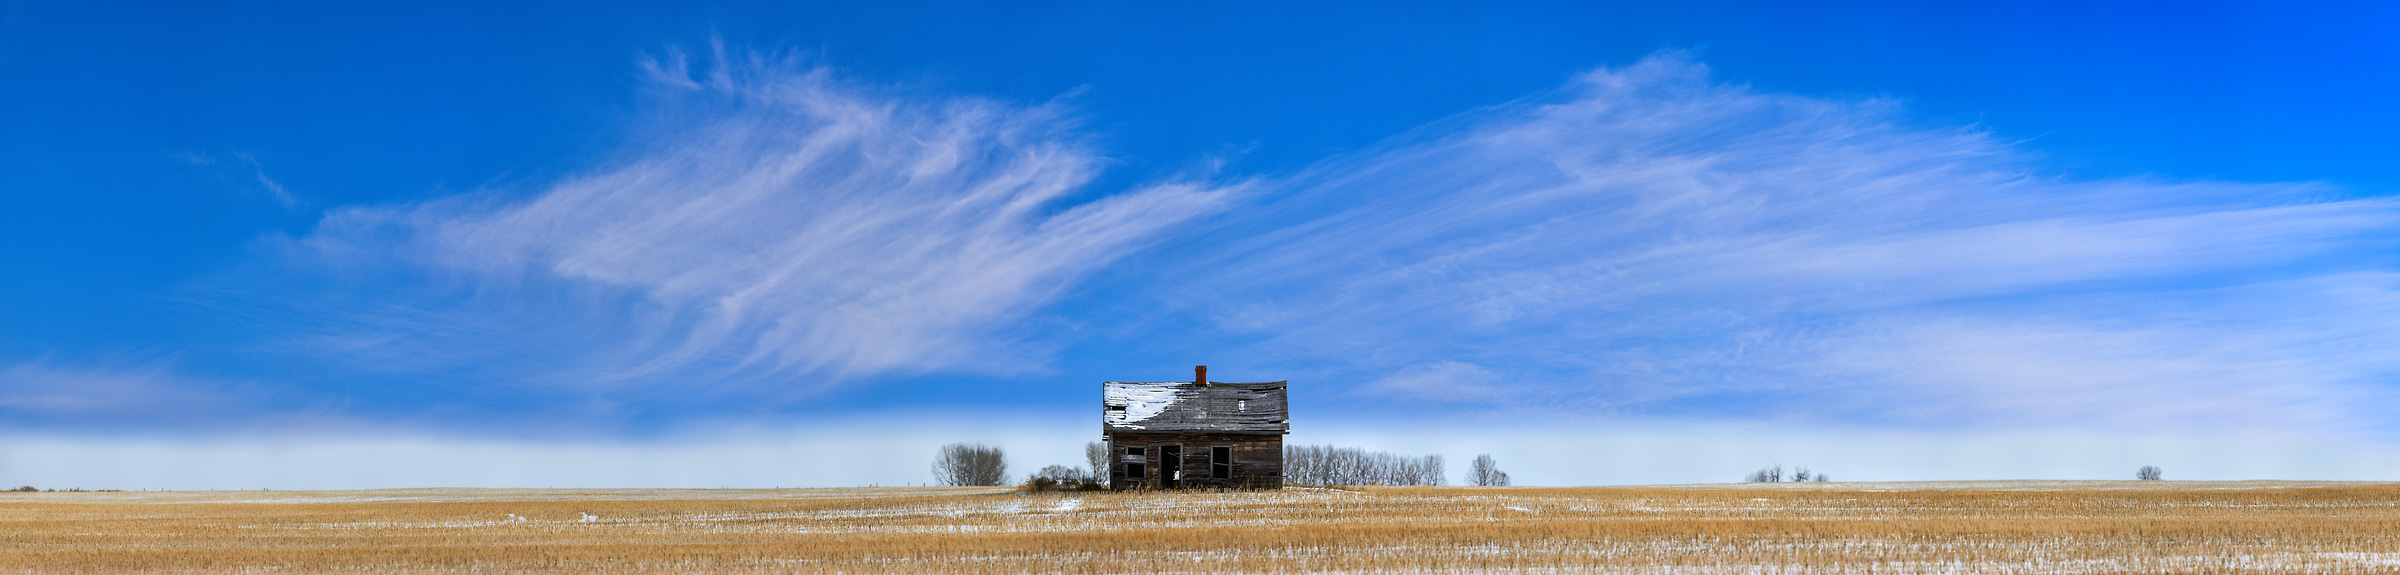 1,647 megapixels! A very high resolution, large-format VAST photo print of an abandoned house; landscape photograph created by Scott Dimond.